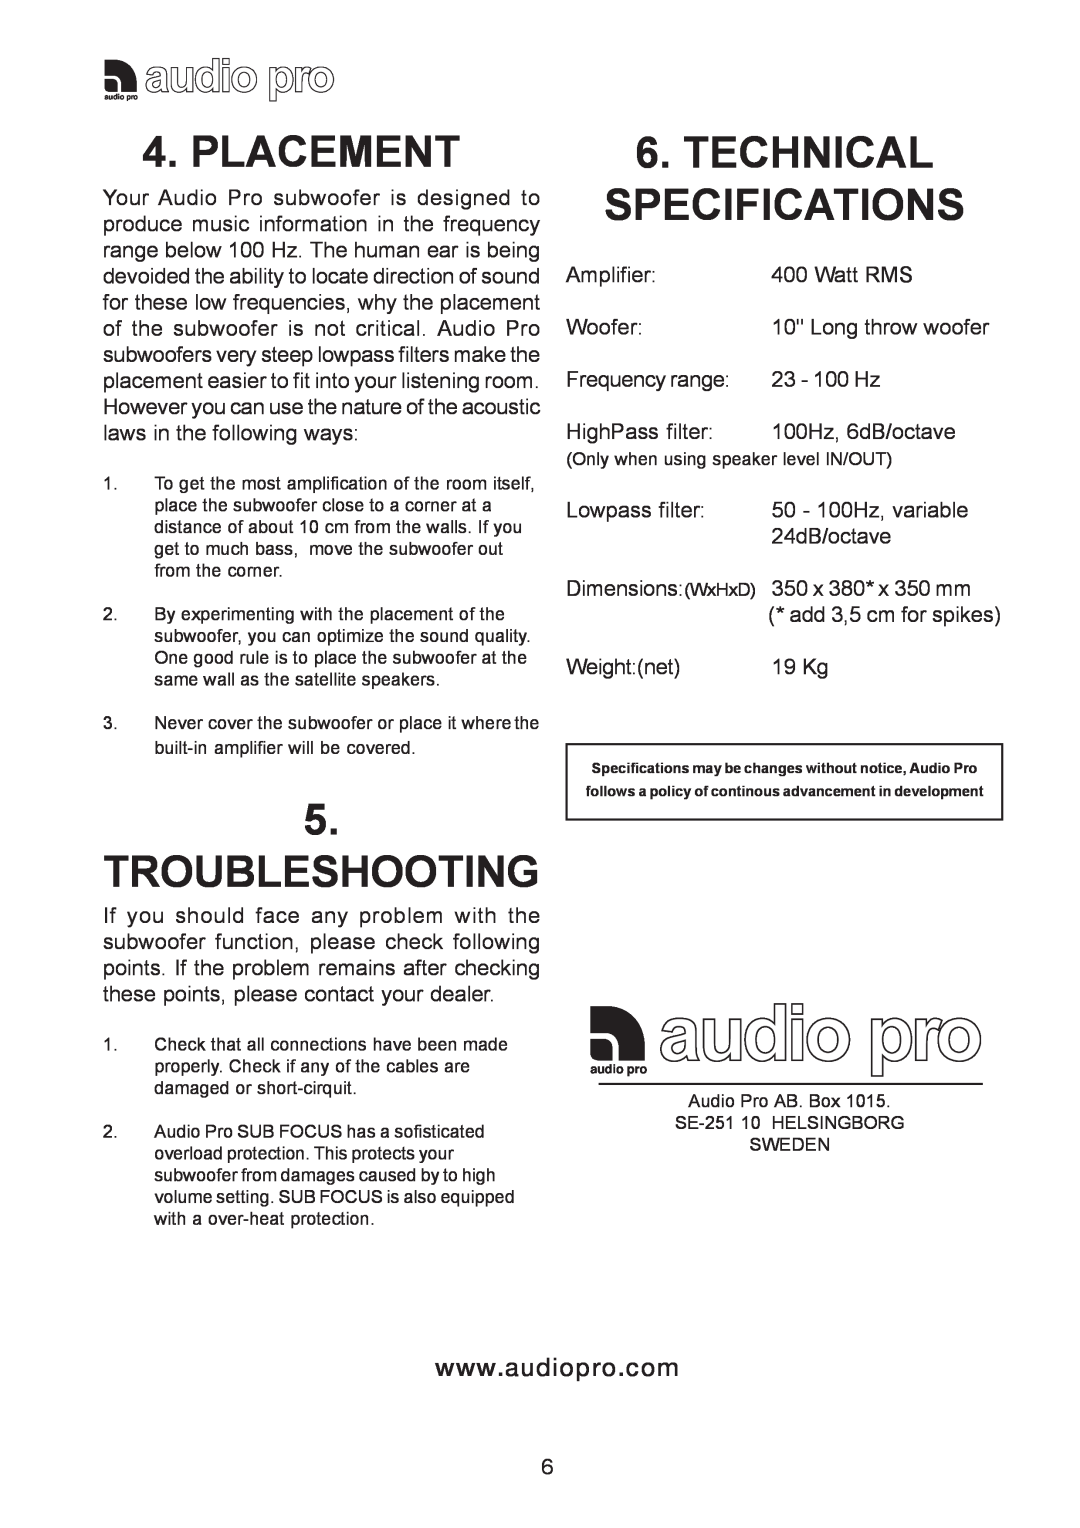 Audio Pro 115V 0502 instruction manual Placement, Troubleshooting, Technical Specifications 